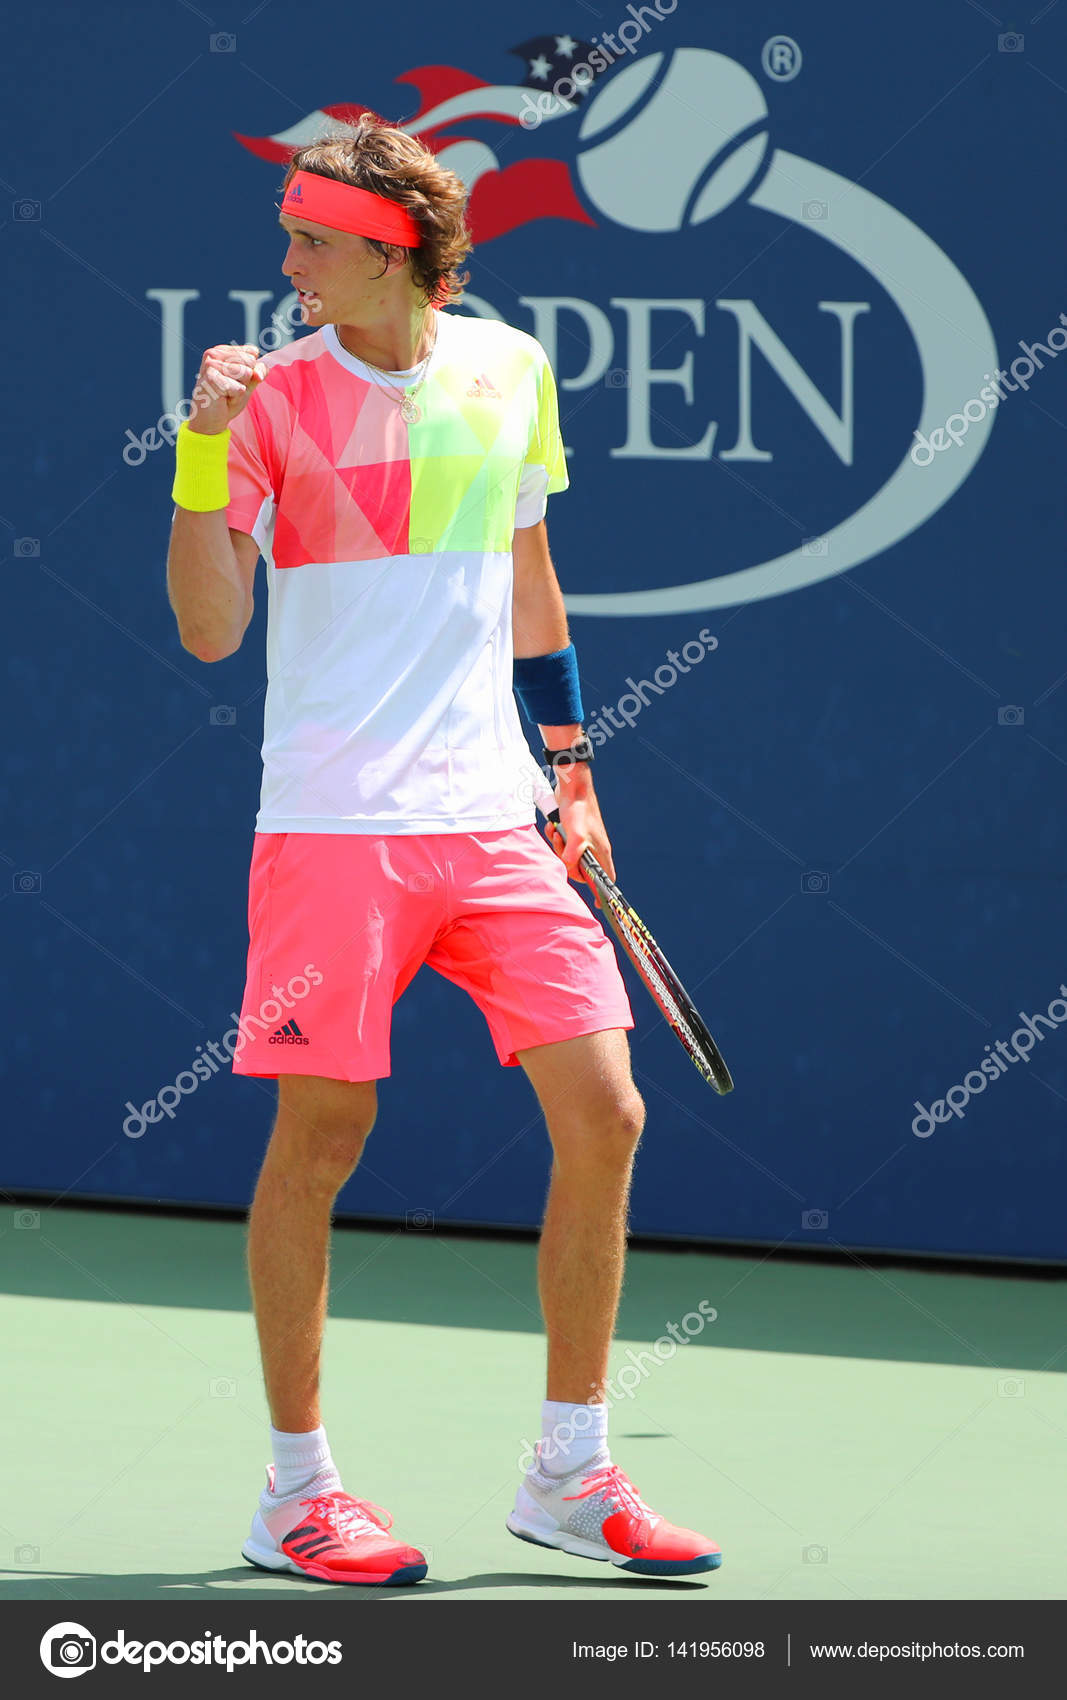 zverev adidas buy clothes shoes online